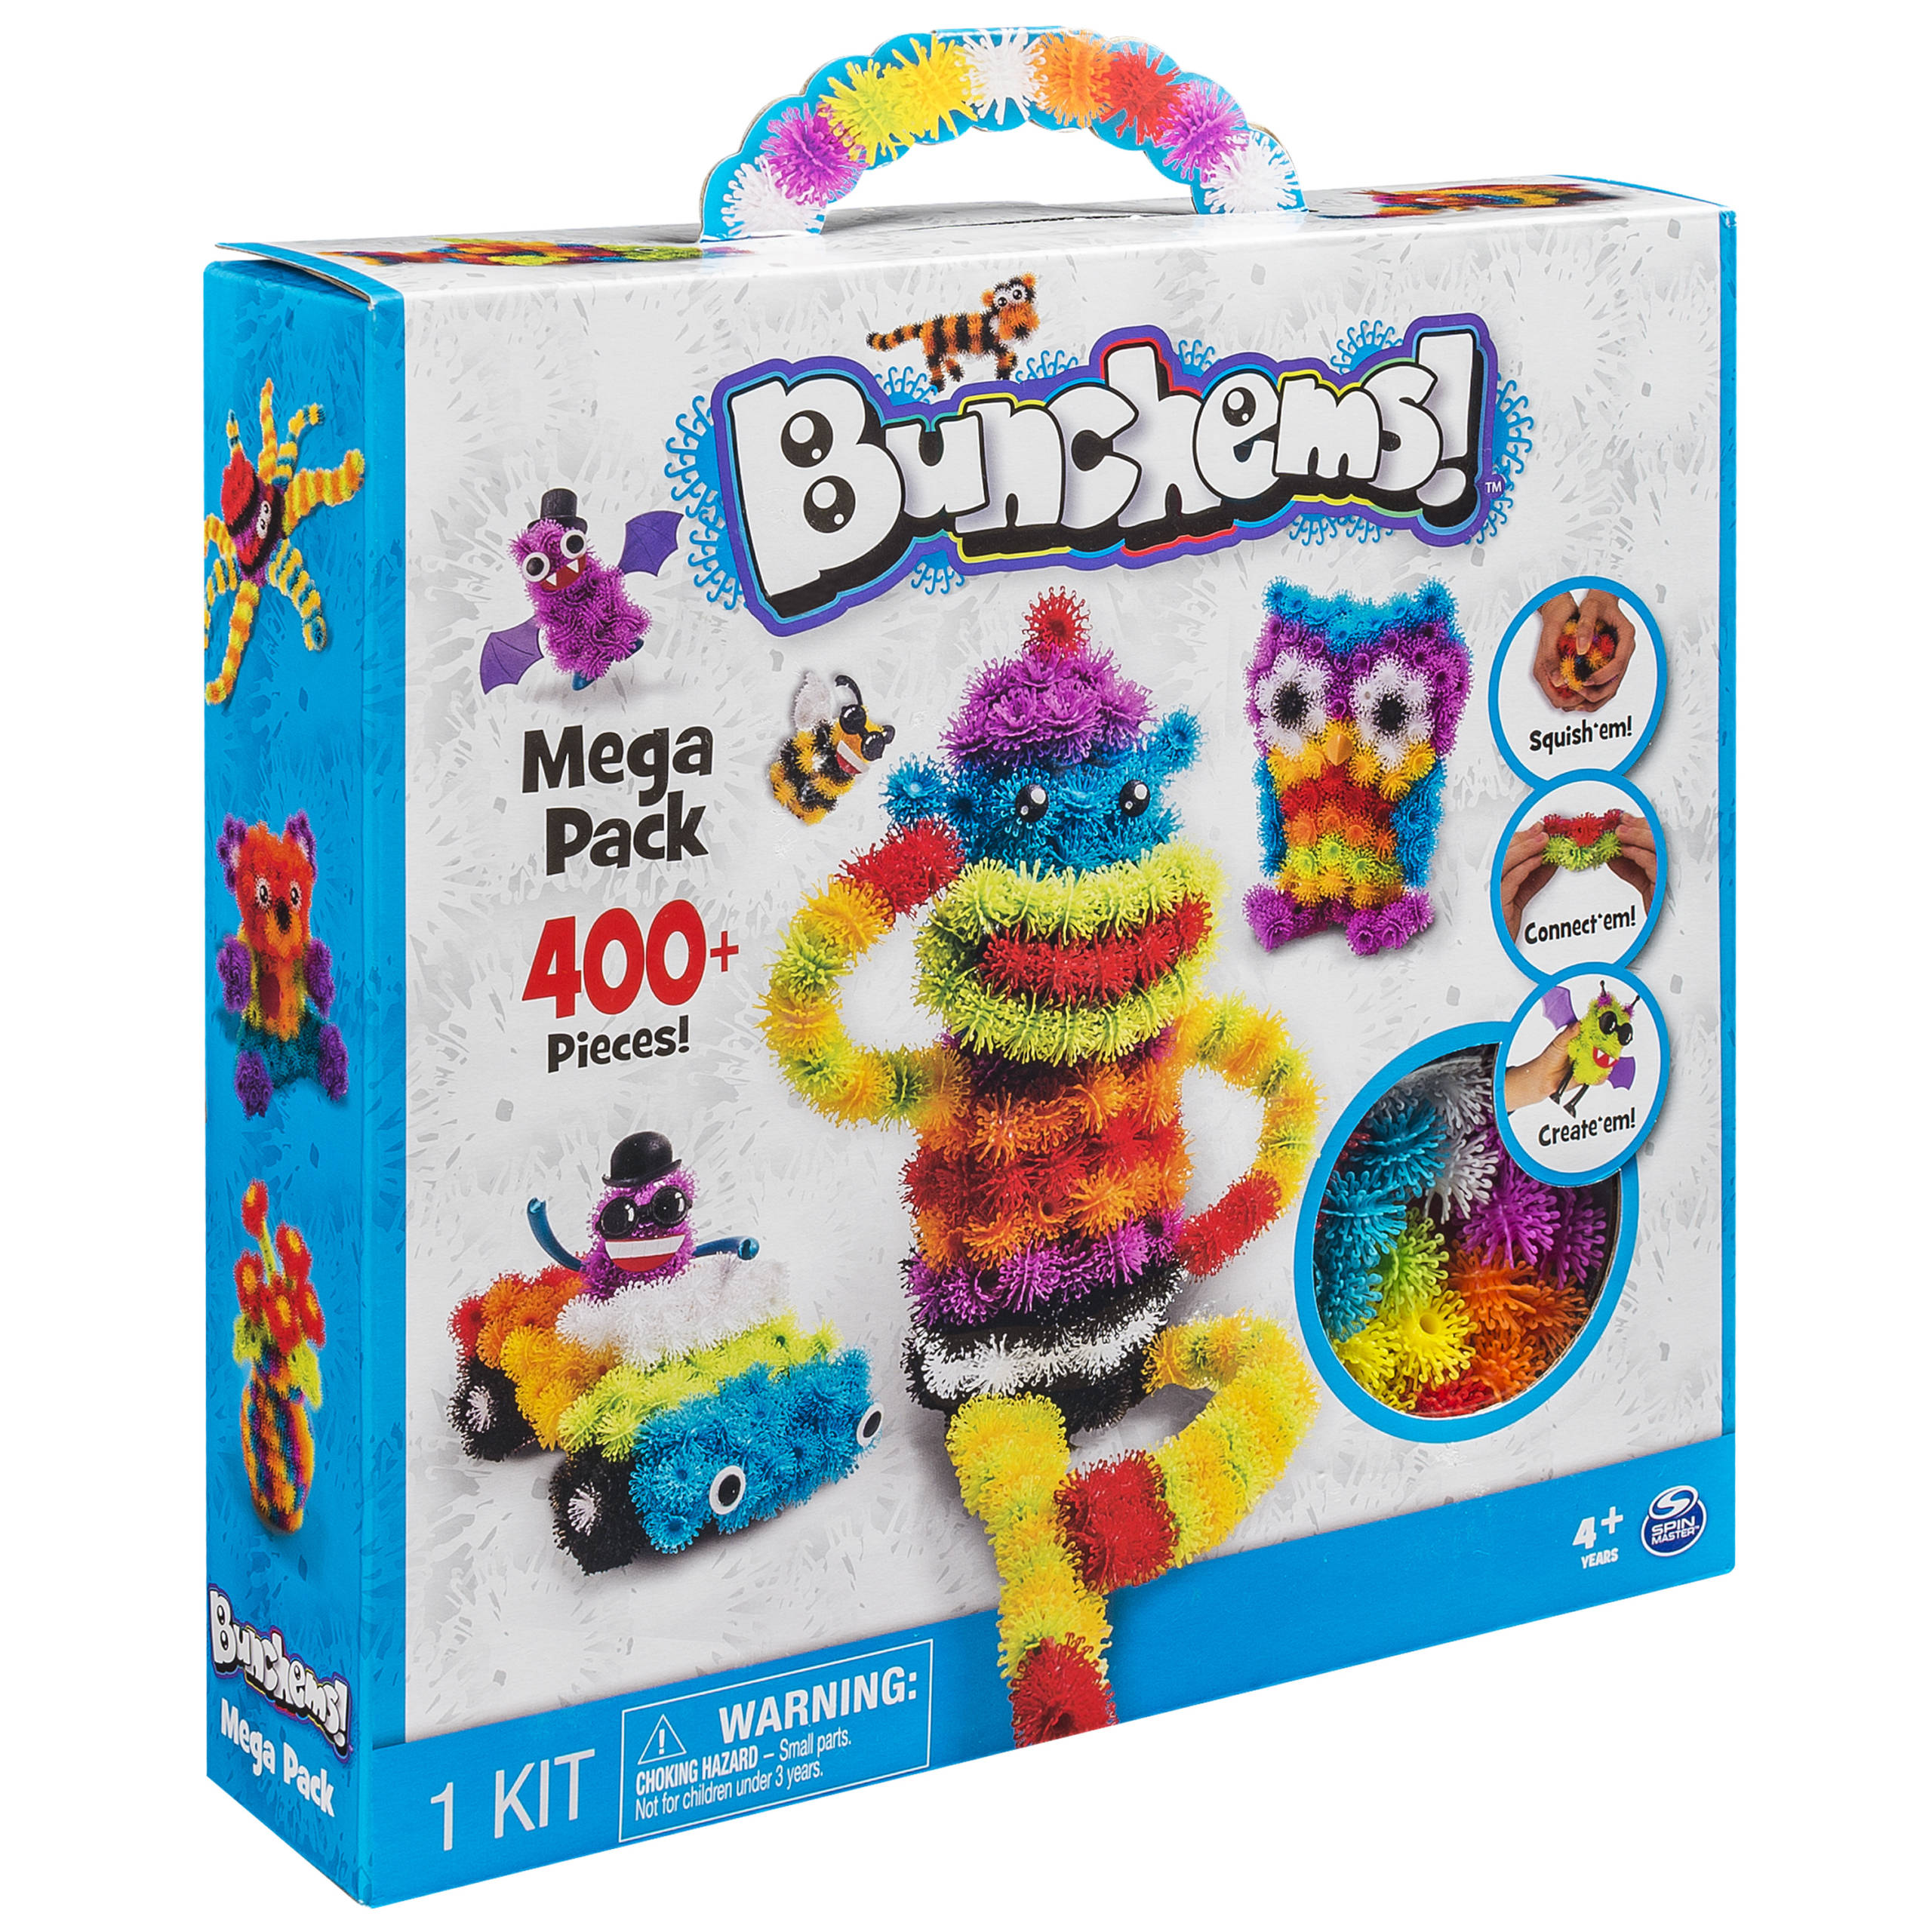 Bunchems Creativity Pack Featuring Big Bunchems and 350+ Pieces - Samko &  Miko Toy Warehouse